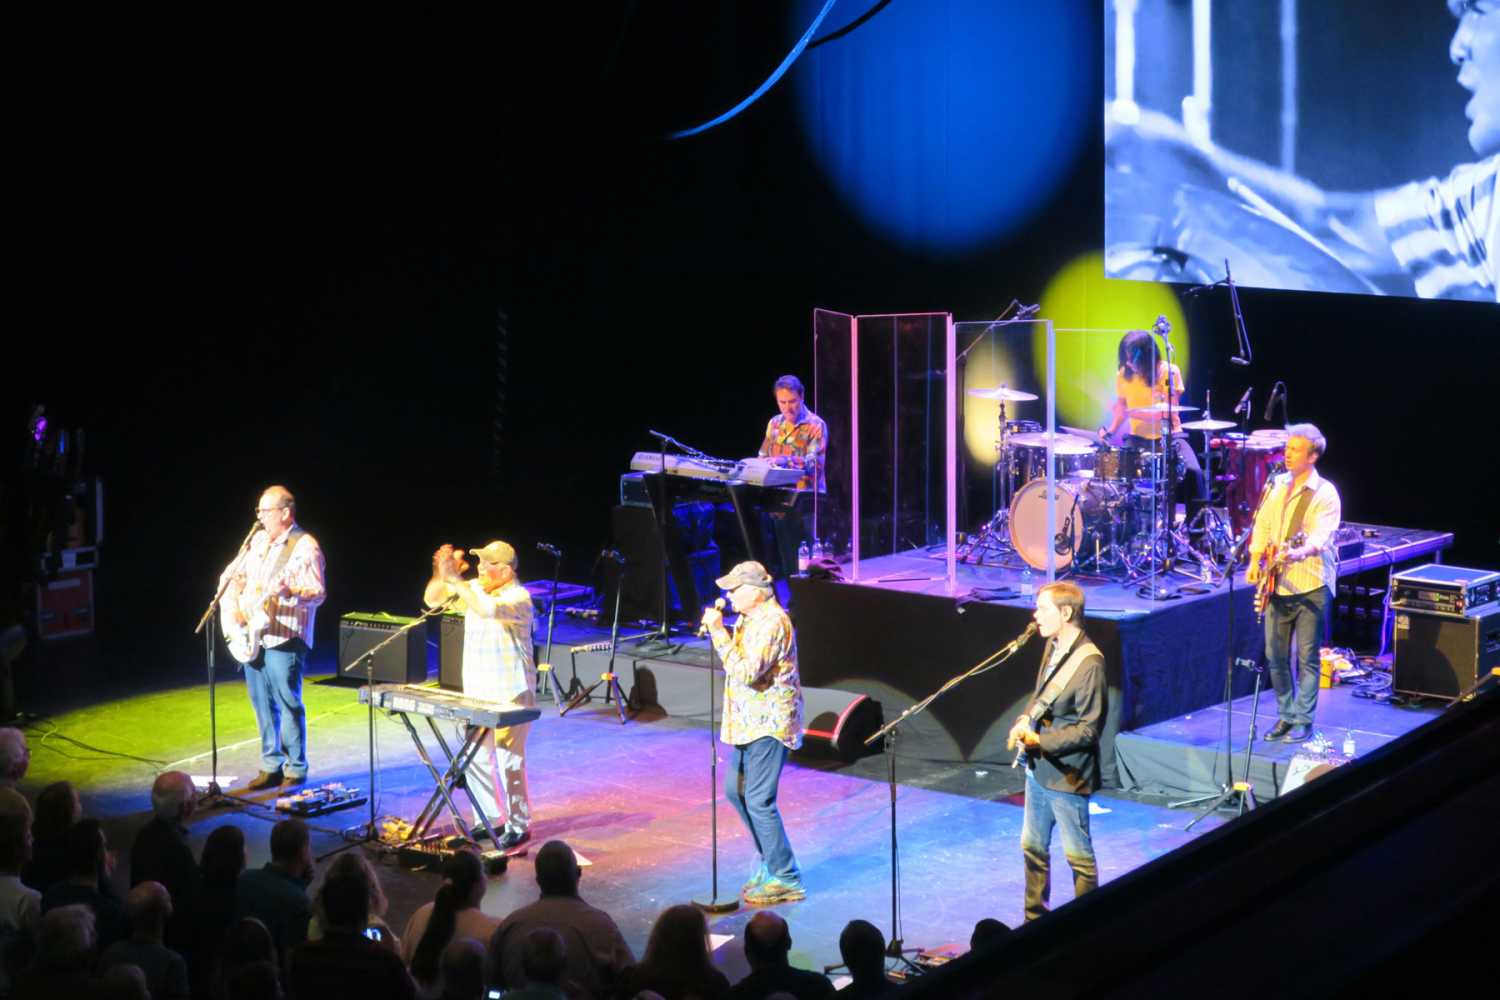 The Beach Boys played to over 2,000 people at the Bord Gáis Energy Theatre